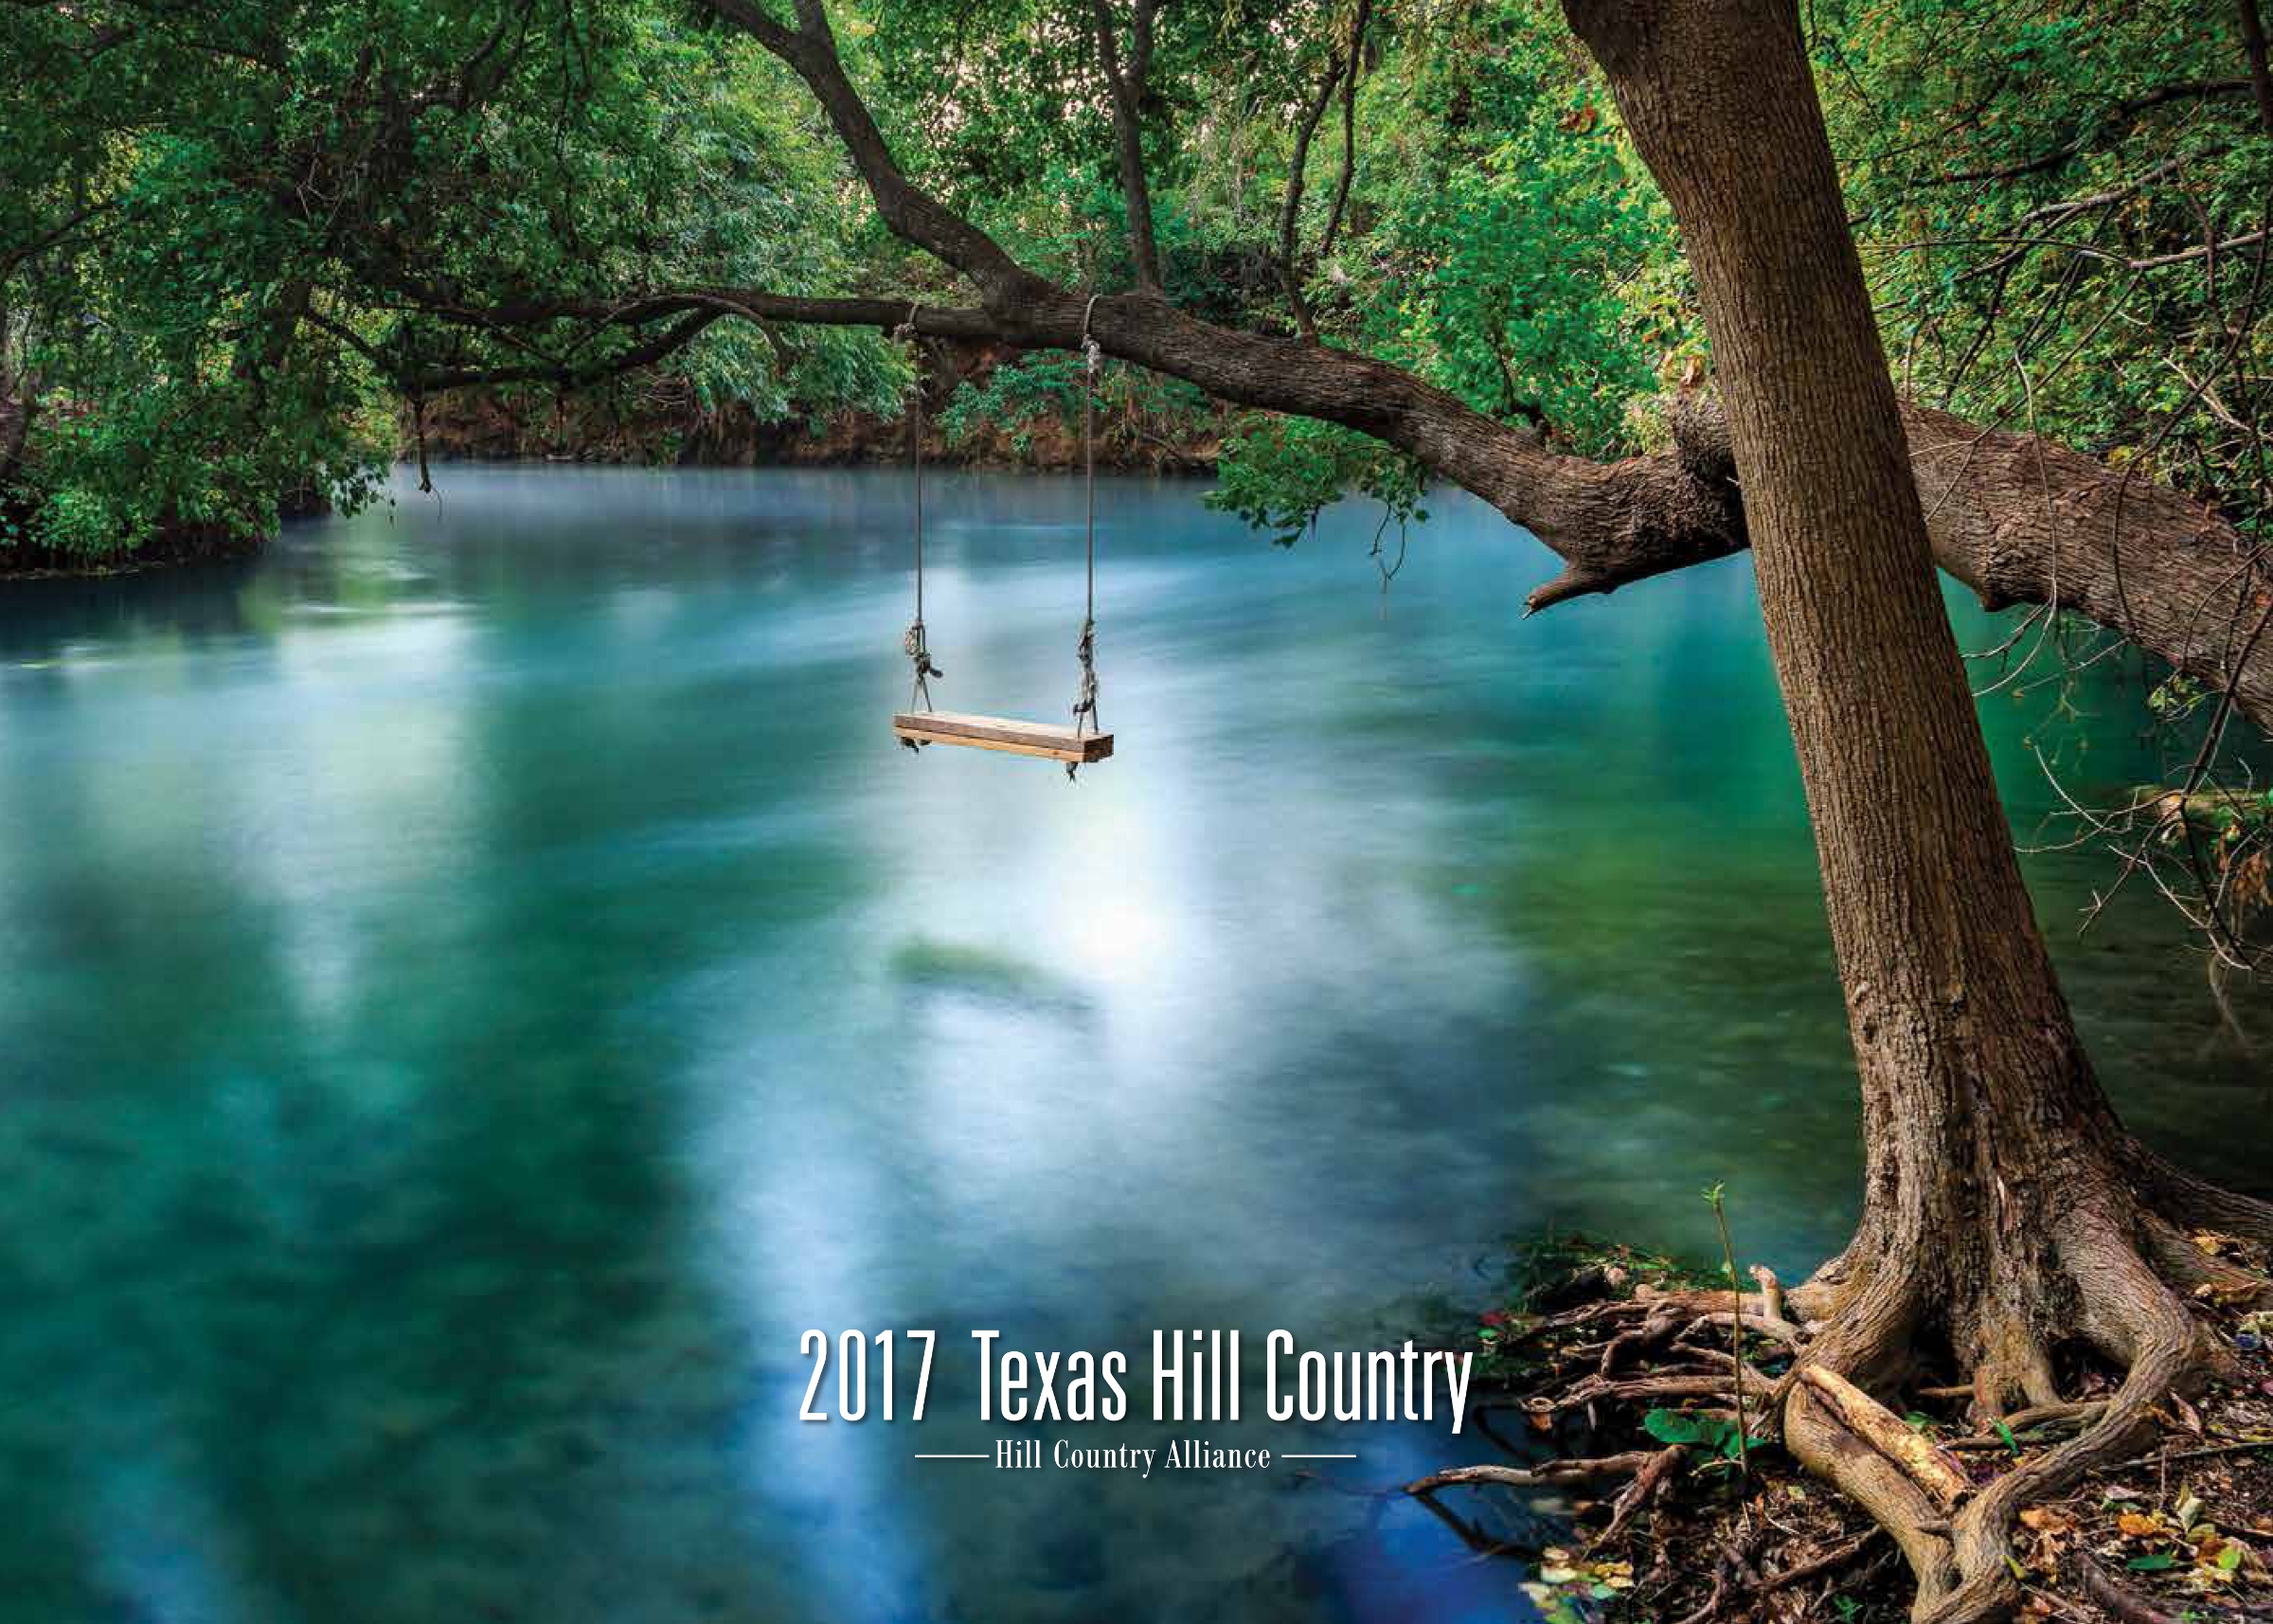 2017 Texas Hill Country Calendar Available for Sale: Photo Contest Winners Announced